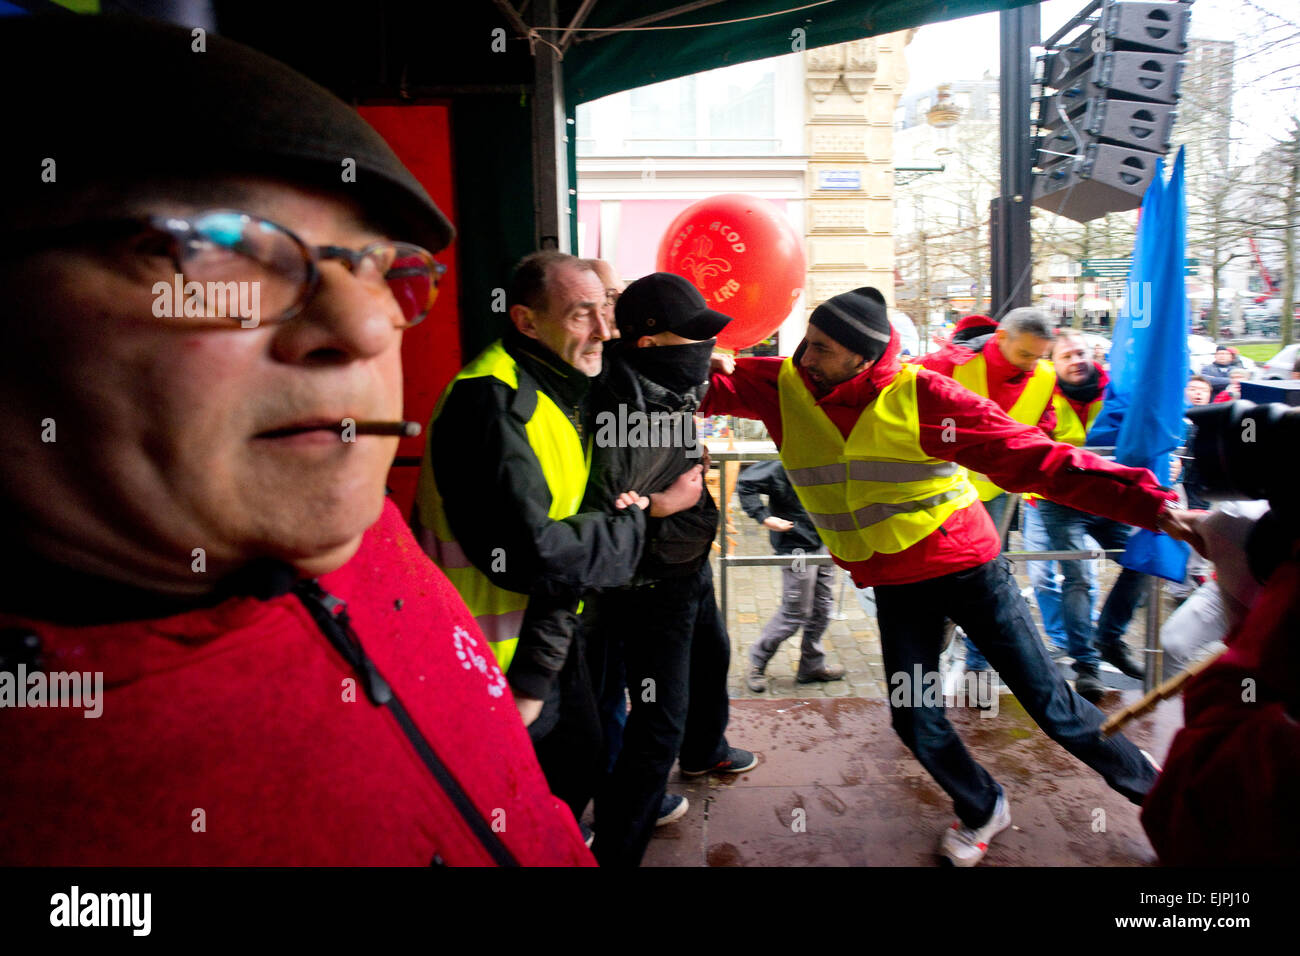 Brussels, Belgium. 30th Mar, 2015. A masked man tries to disrupt an union union leader's speech by storming the stage, he was being taken away by the security team. - Thousands took part in an anti austerity demonstration organized by multiple workers' unions and political parties. Clash broke out as members of 'LCR' (Revolutionary Communist League of Belgium) tries to take over the stage. Credit:  Geovien So/Pacific Press/Alamy Live News Stock Photo